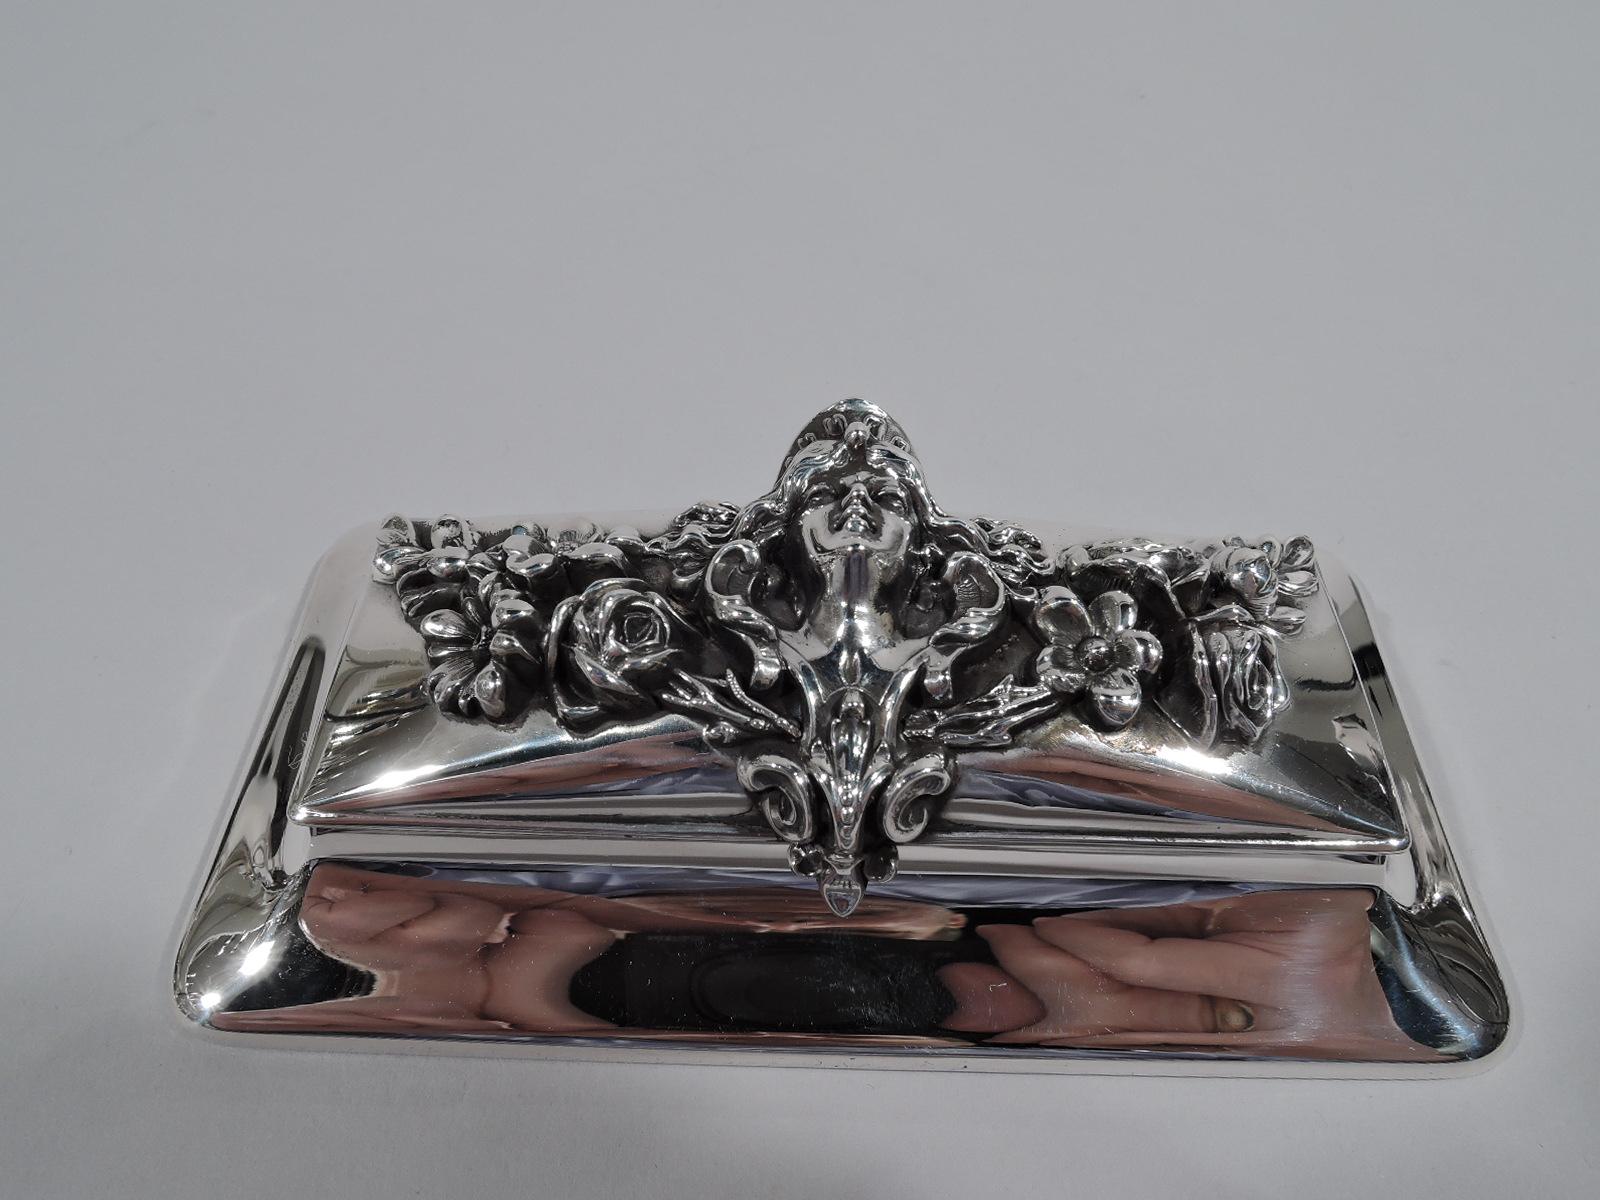 Art Nouveau sterling silver postage stamp box. Made by William B. Kerr in Newark, circa 1900. Rectangular on spread base. Cover hinged and raised with applied floral garland, a female head at center. A splendid and tactile take on the